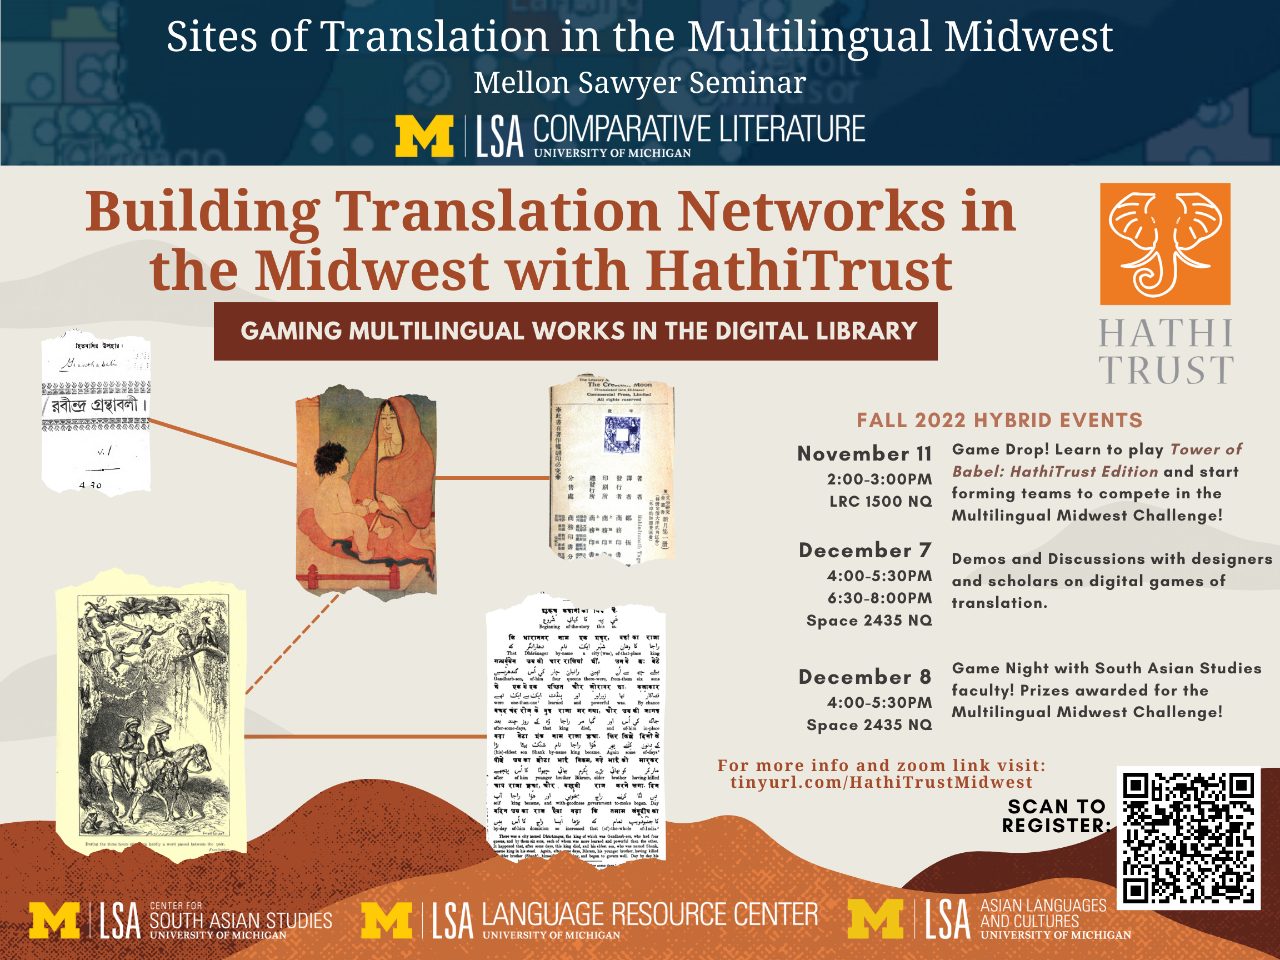 Text, “Sites of Translation in the Multilingual Midwest-Mellon Sawyer Seminar. Building Translation Networks in the Midwest with HathiTrust. Gaming Multilingual Works in the Digital Library. Fall 2022 Hybrid Events: November 11, 2-3PM, LCR 1500 North Quad - Game Drop! Learn to play Tower of Babel: HathiTrust Edition and start forming teams to compete in the Multilingual Midwest Challenge! December 7, 4-5:30PM and 6:30-8PM, Space 2435 North Quad - Demos and Discussions with designers and scholars on digital games of translation. December 8, 4-5:30PM, Space 2435 North Quad - Game Night with South Asian Studies faculty! Prizes awarded for the Multilingual Midwest Challenge!”